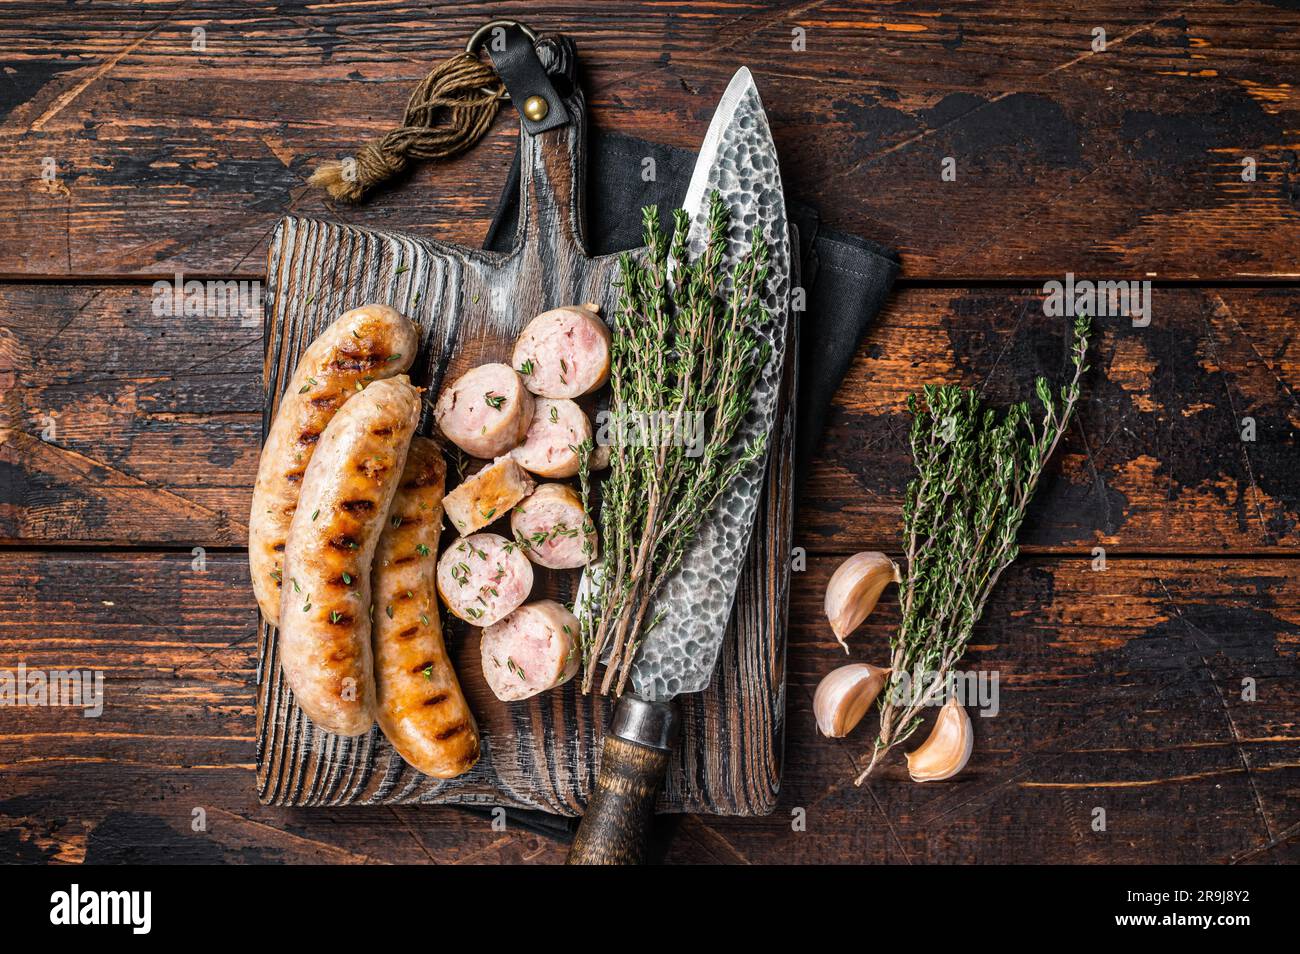 Sliced grilled pork meat sausages on a wooden serving board. Wooden background. Top view. Stock Photo